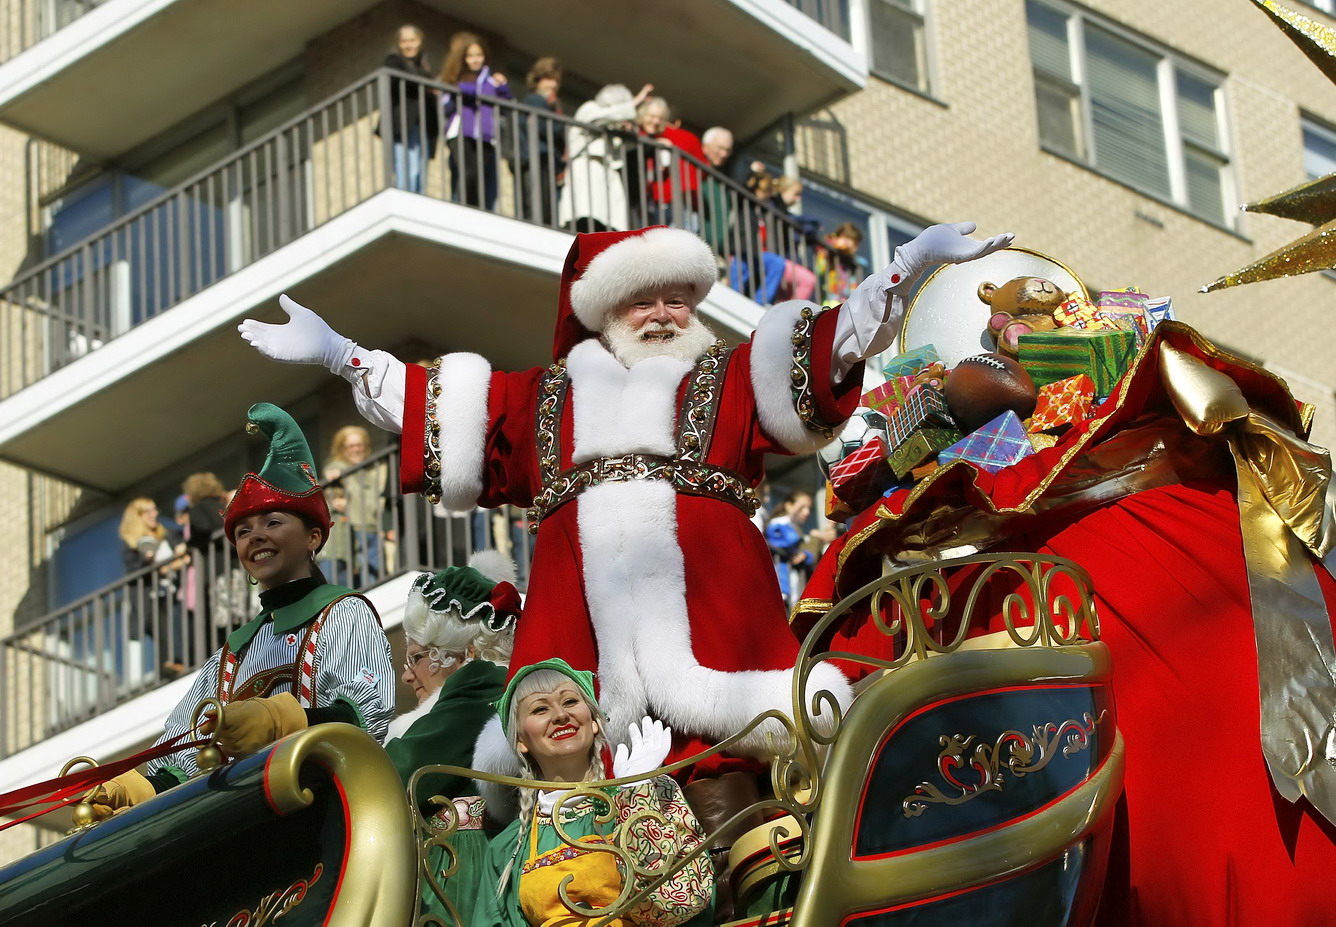 Santa Claus rides on his sleigh down Central Park West during the 86th Macy's Thanksgiving Day Parade in New York November 22, 2012.    REUTERS/Gary Hershorn (UNITED STATES - Tags: ENTERTAINMENT SOCIETY)